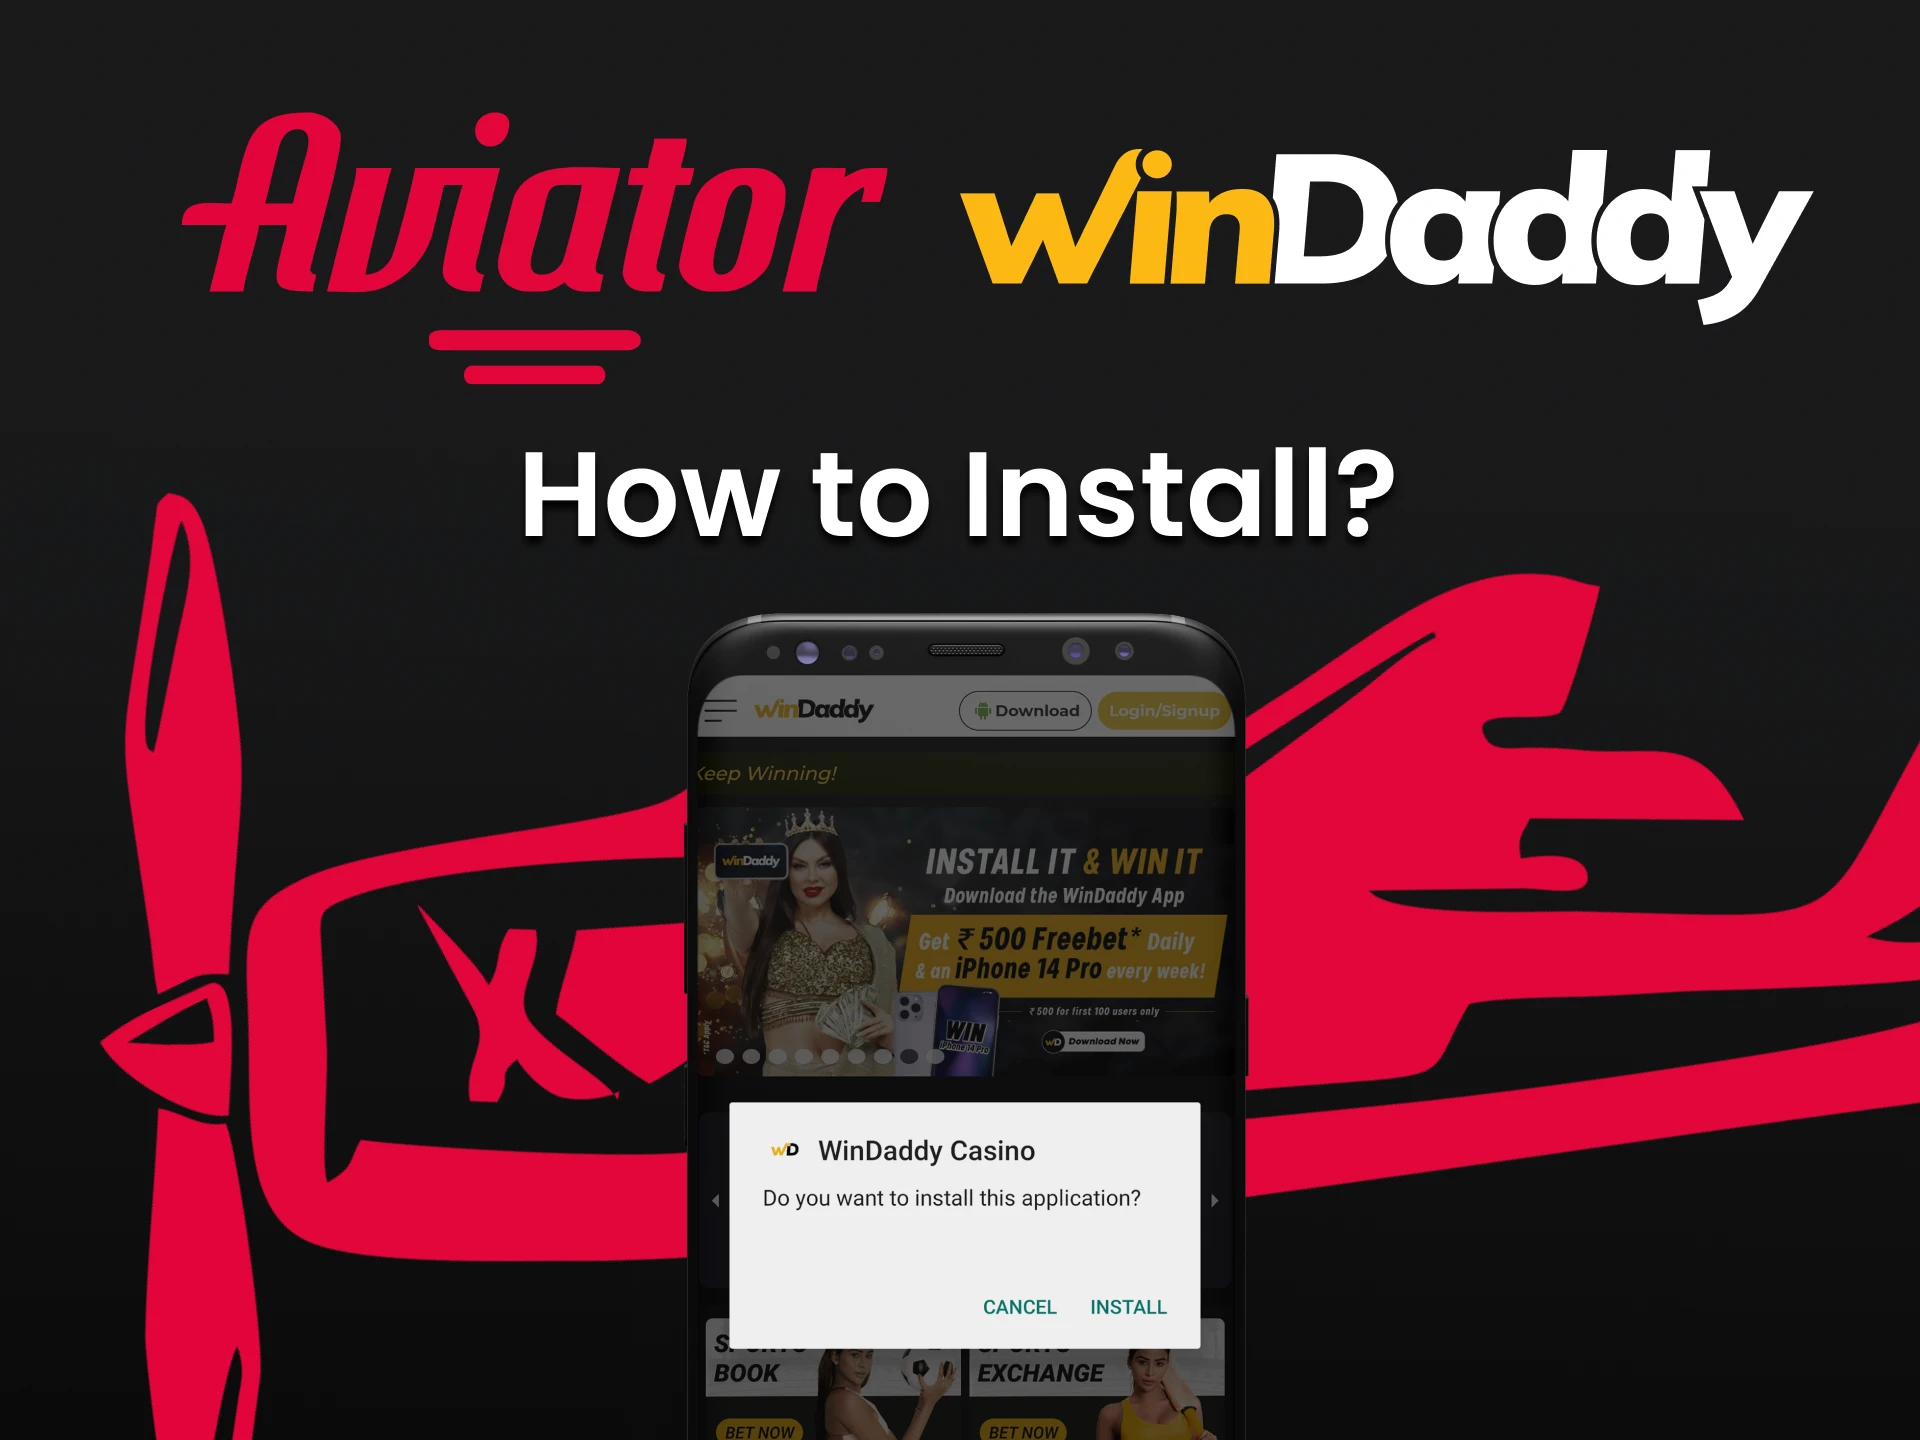 Install and play Aviator by WinDaddy.